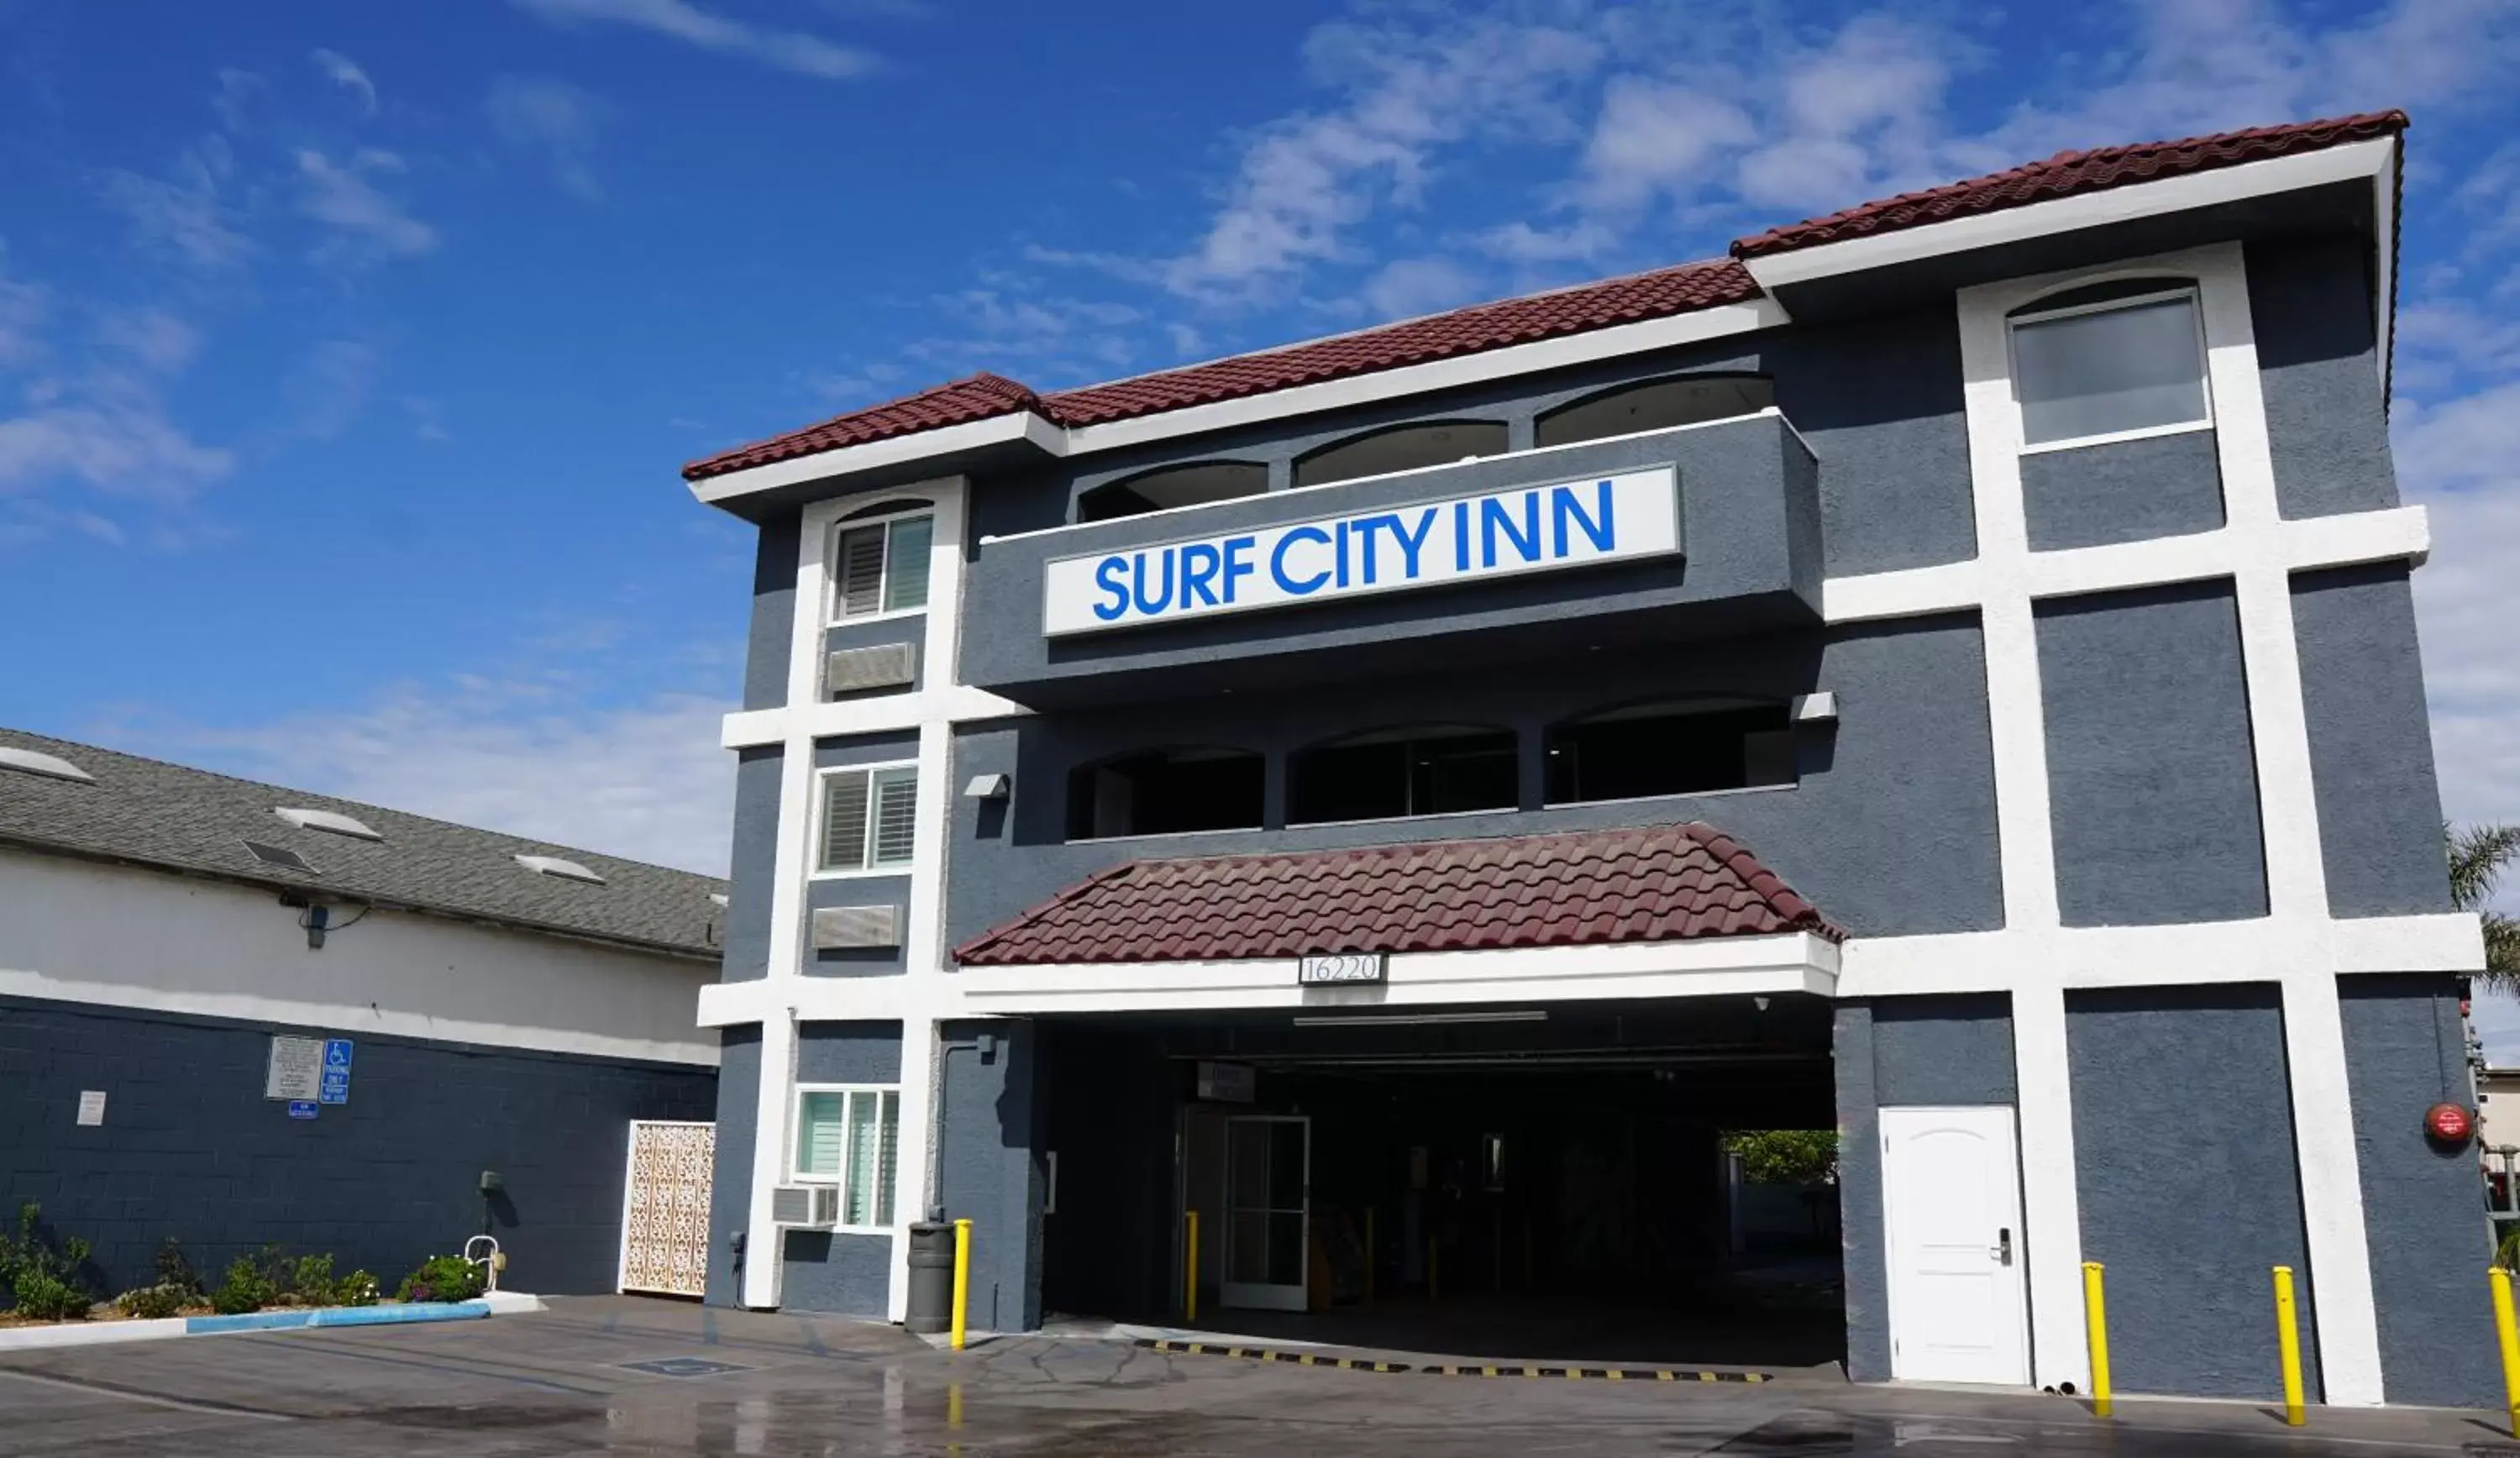 Property Building in Surf City Inn